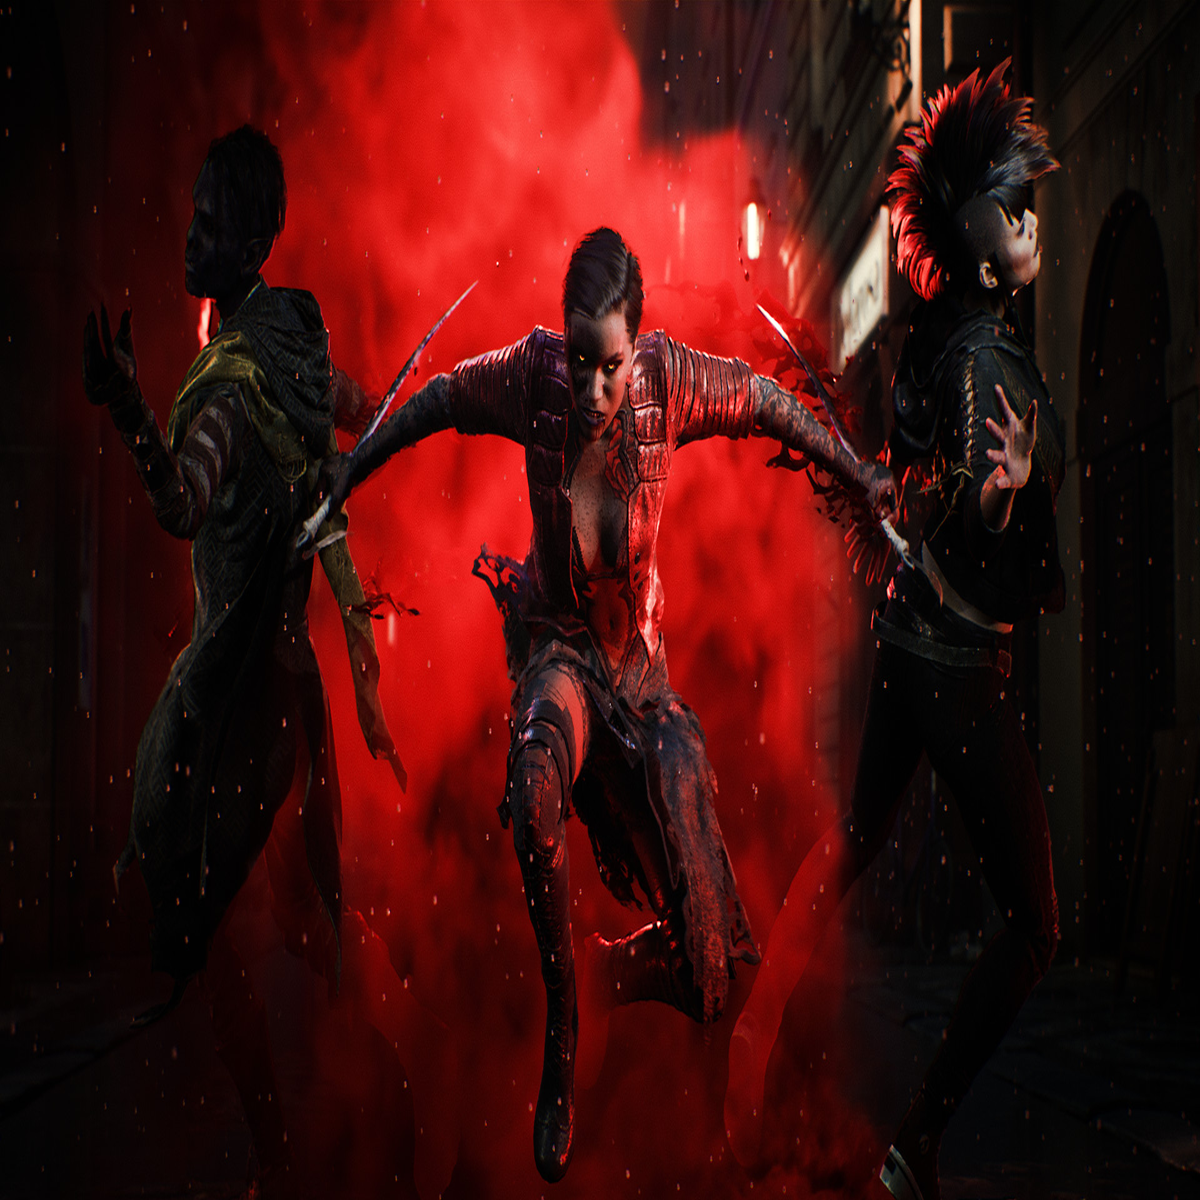 Steam Community :: Guide :: Vampire: The Masquerade - Bloodlines /v/ Guide  (picture)